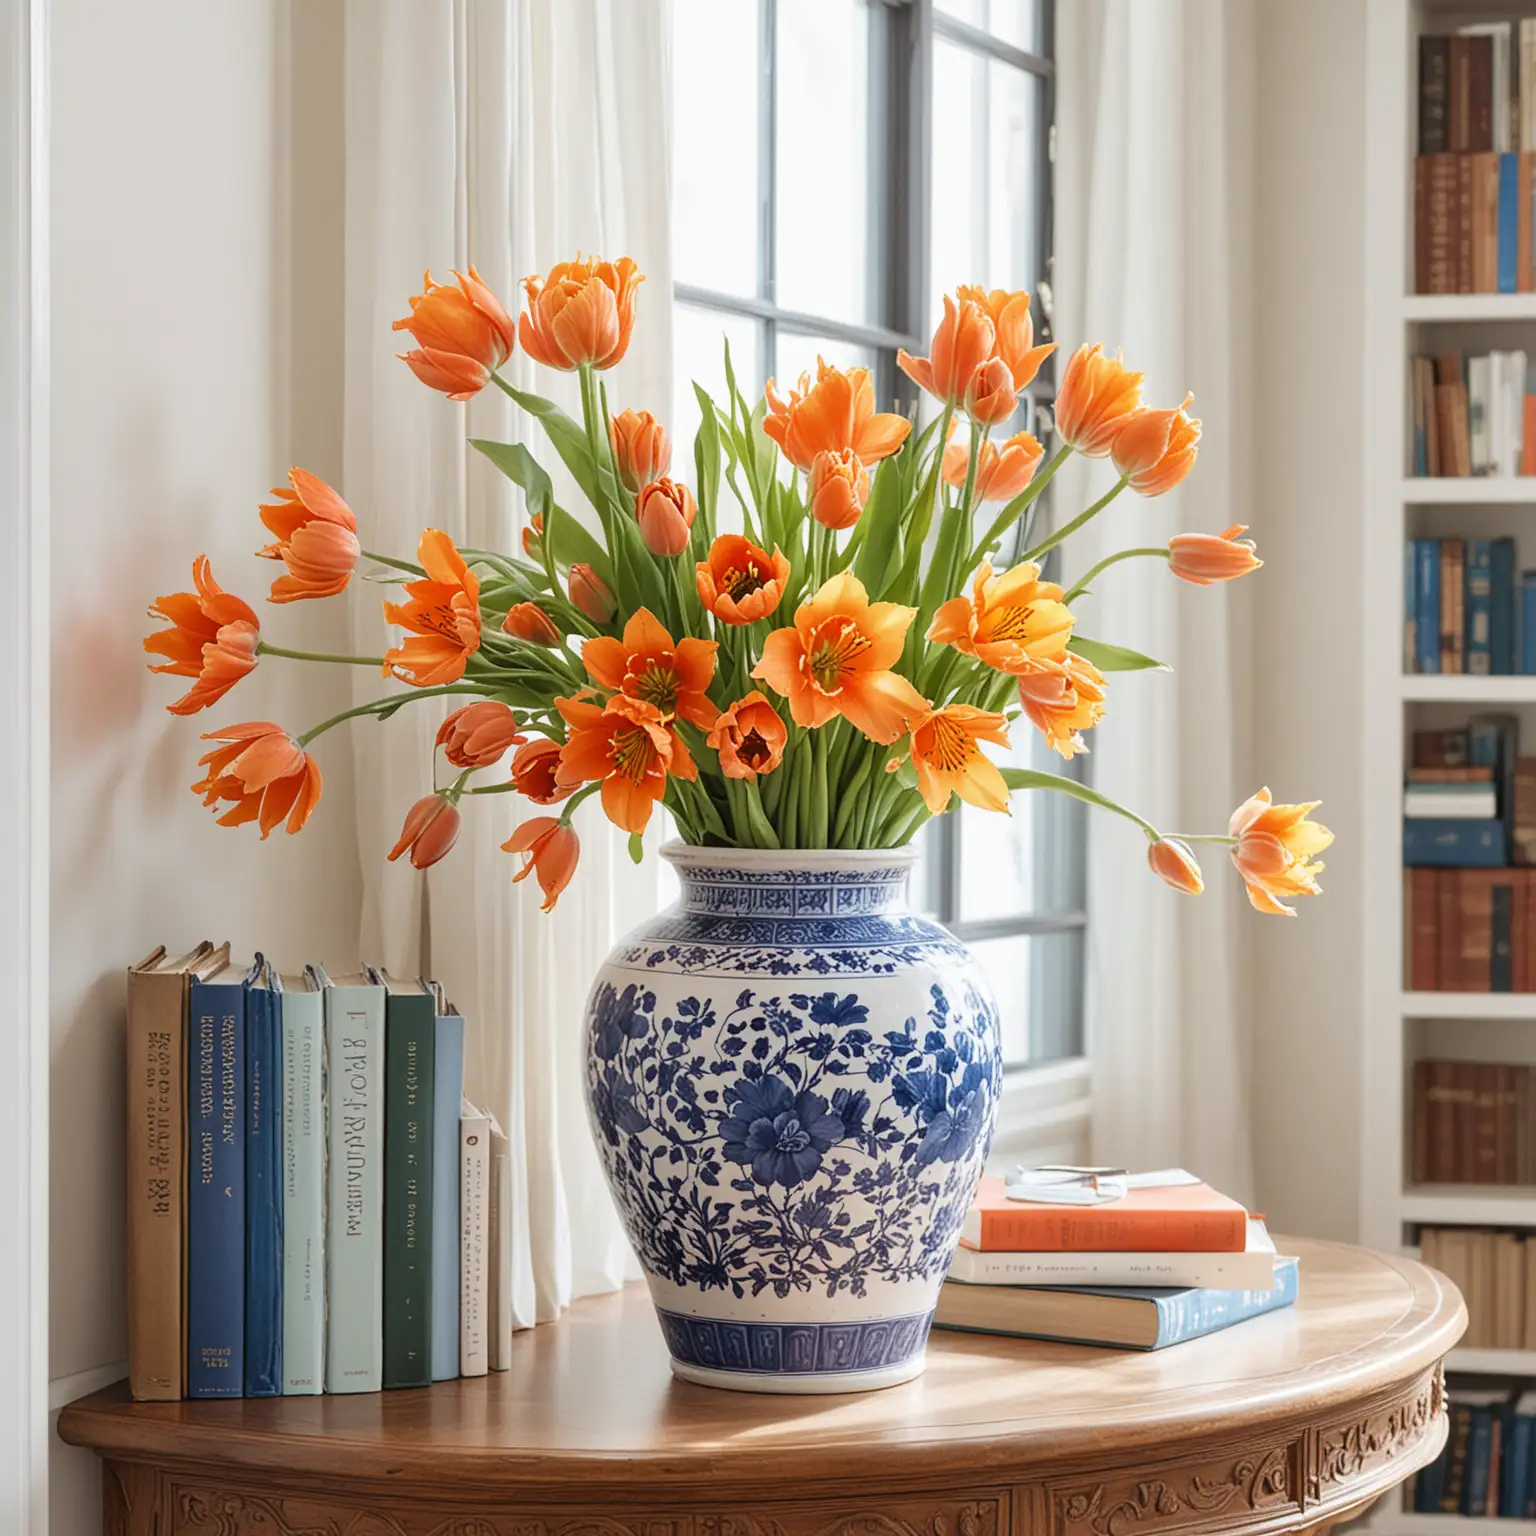 A blue and white chinoiserie round vase filled with orange parrot tulips on a console with books an other decor.  a window and white walls are behind it